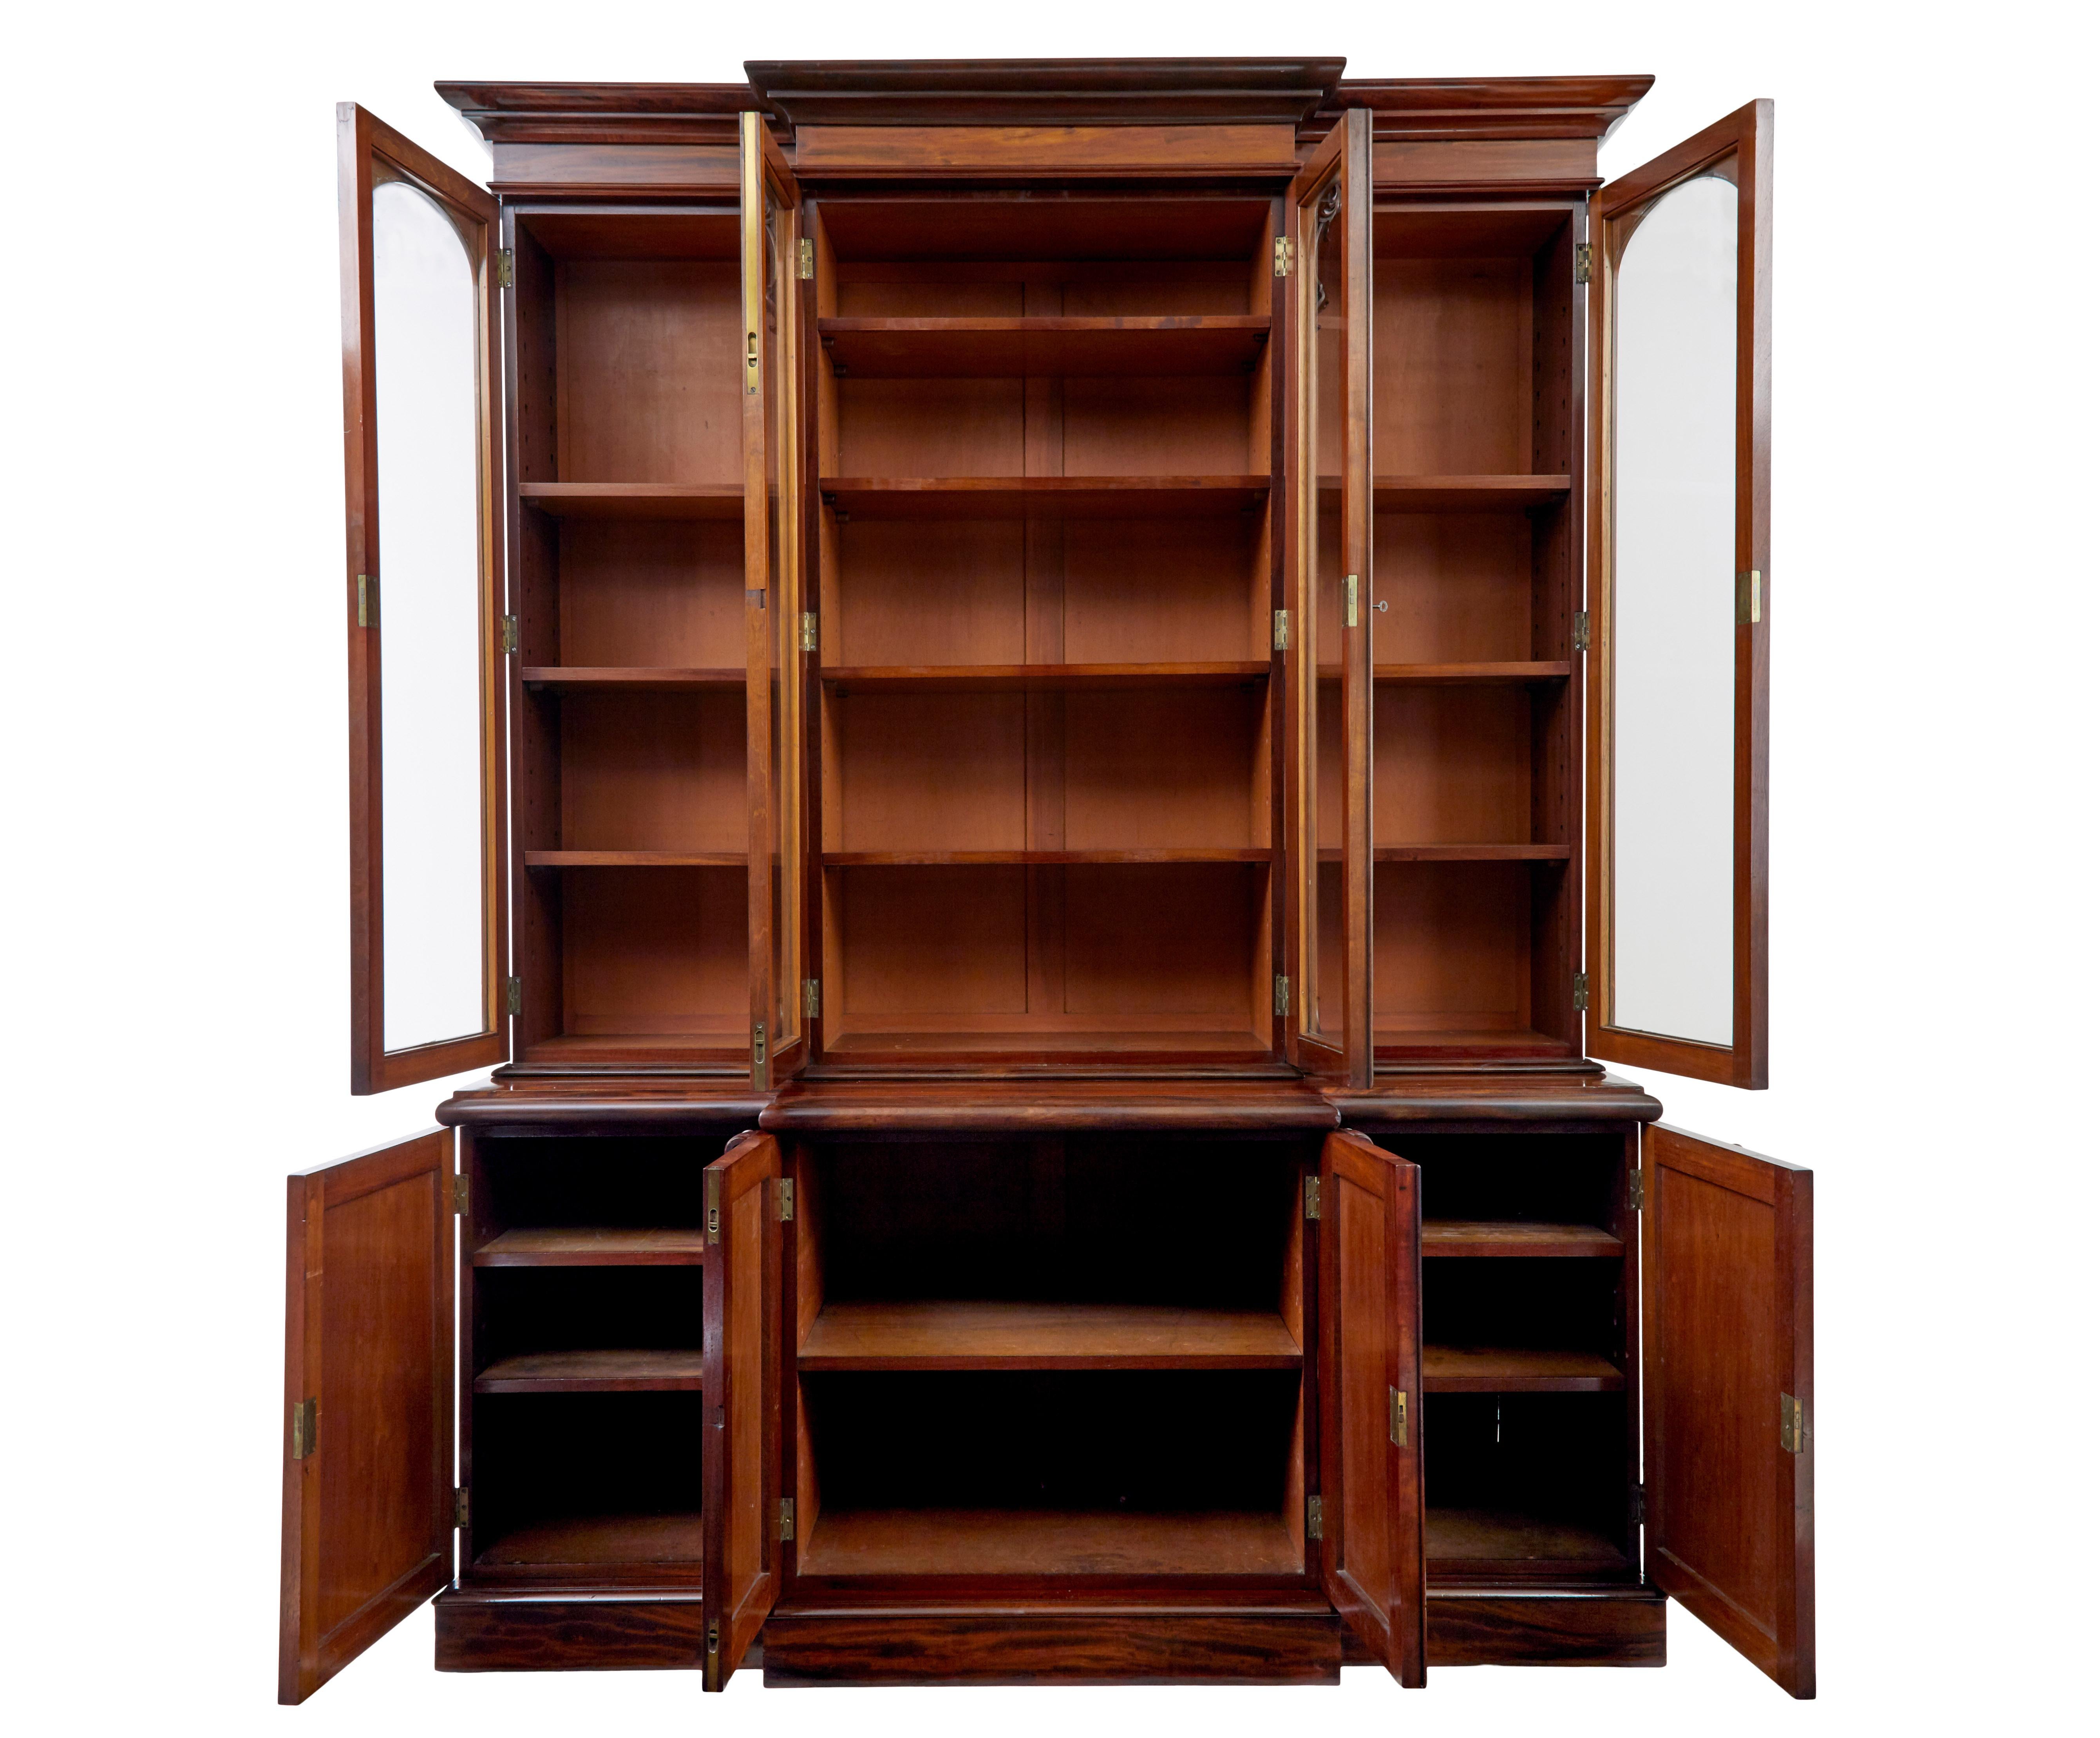 Early victorian 19th century flame mahogany breakfront bookcase, circa 1850.

Comprising of 5 sections. Plinth, cupboard, middle section, glazed unit and cornice.

Made front the finest quality matching veneers. With applied lambs tongue carvings.